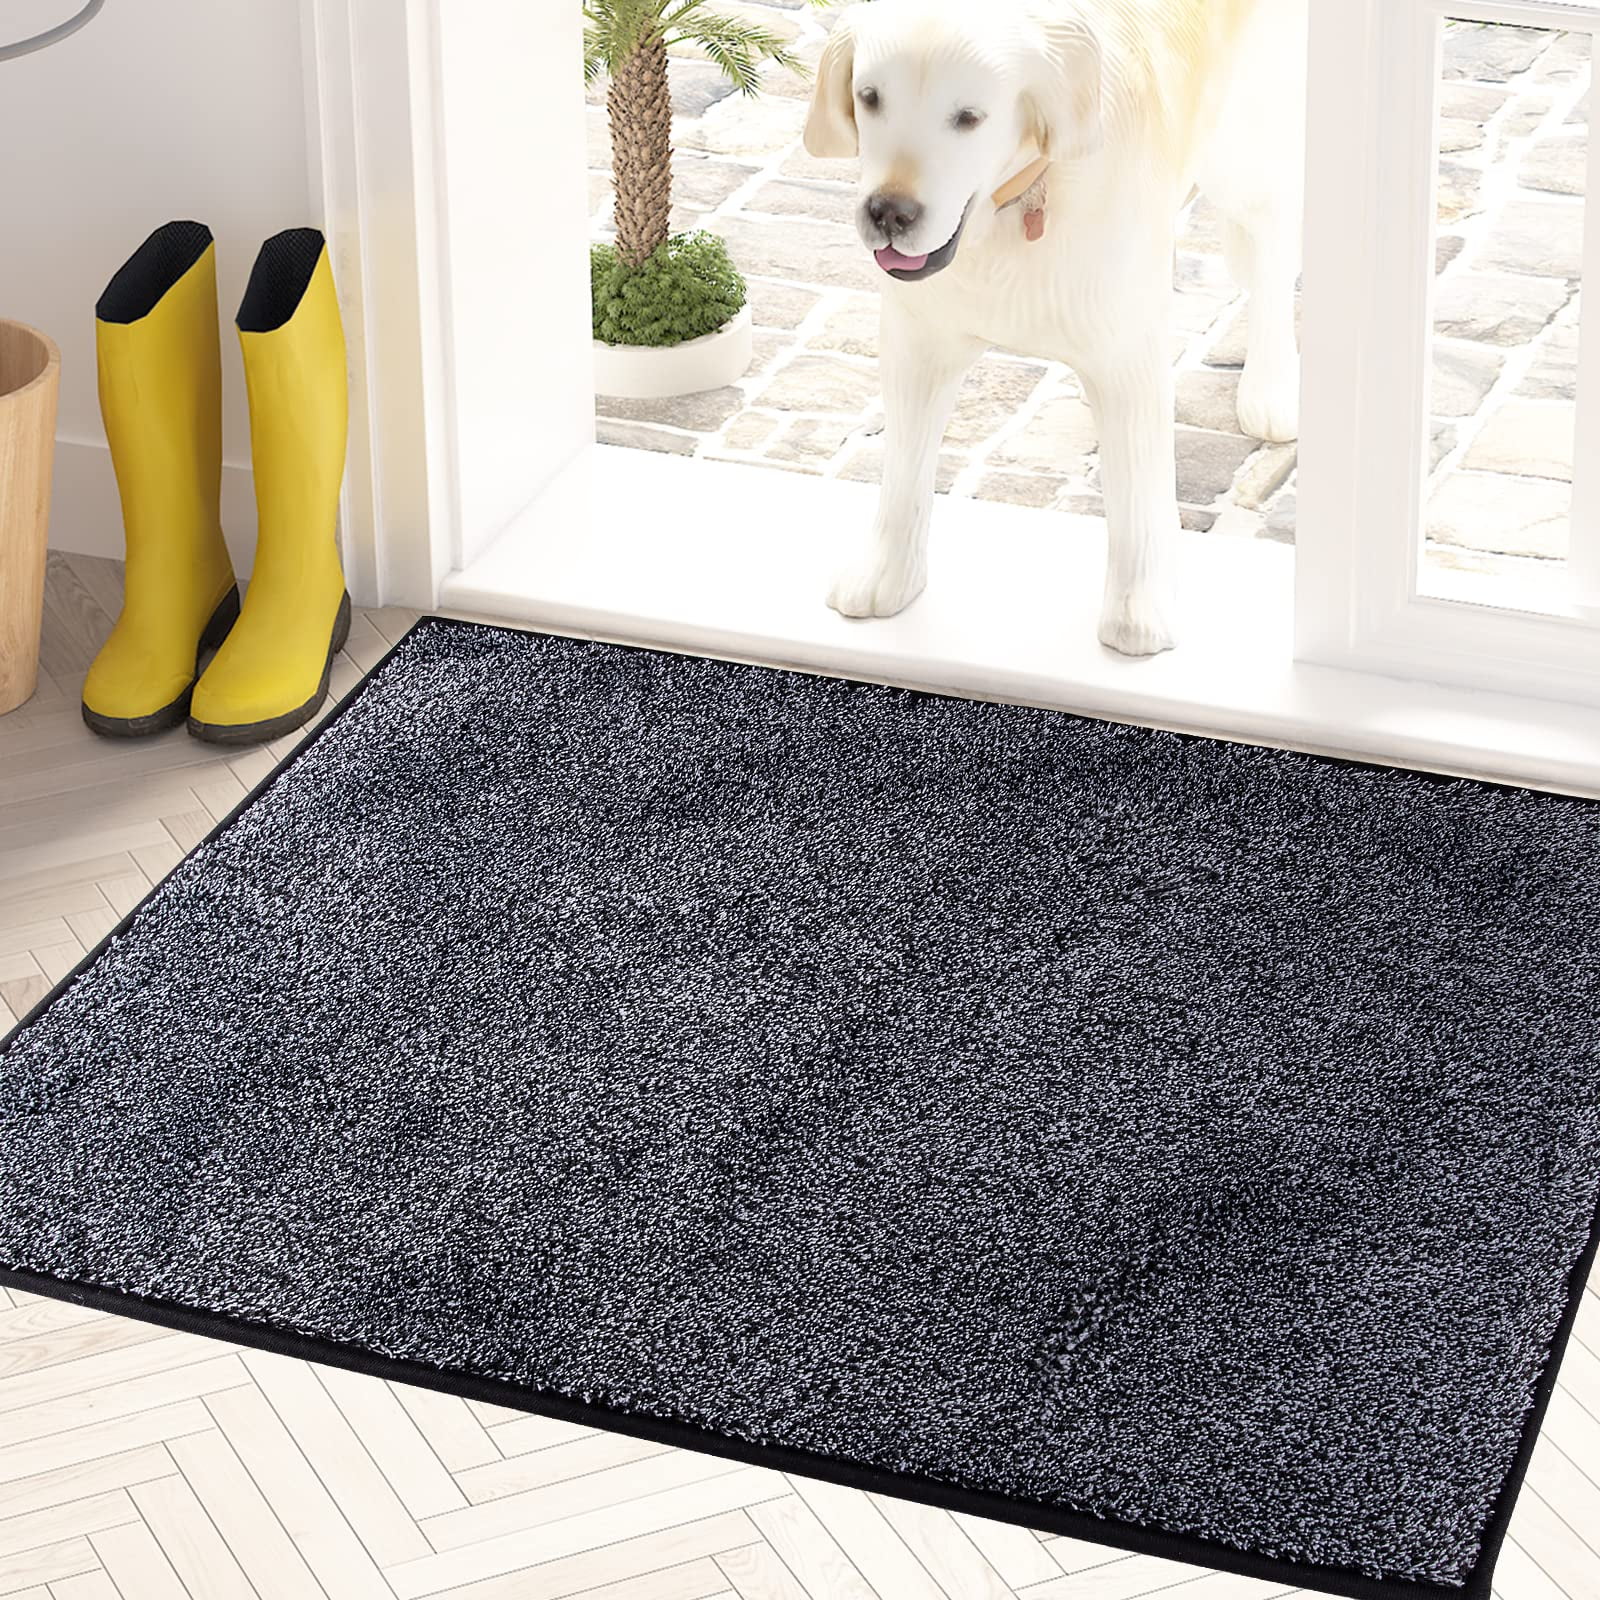  Door Mats Outdoor Indoor Doormat-Rubber Non Slip Absorbent  Front Door Mats for Outside Entry Entrance-Dirt Trapper Mat for Muddy Paws  and Shoes-Gray-17”x30” : Patio, Lawn & Garden